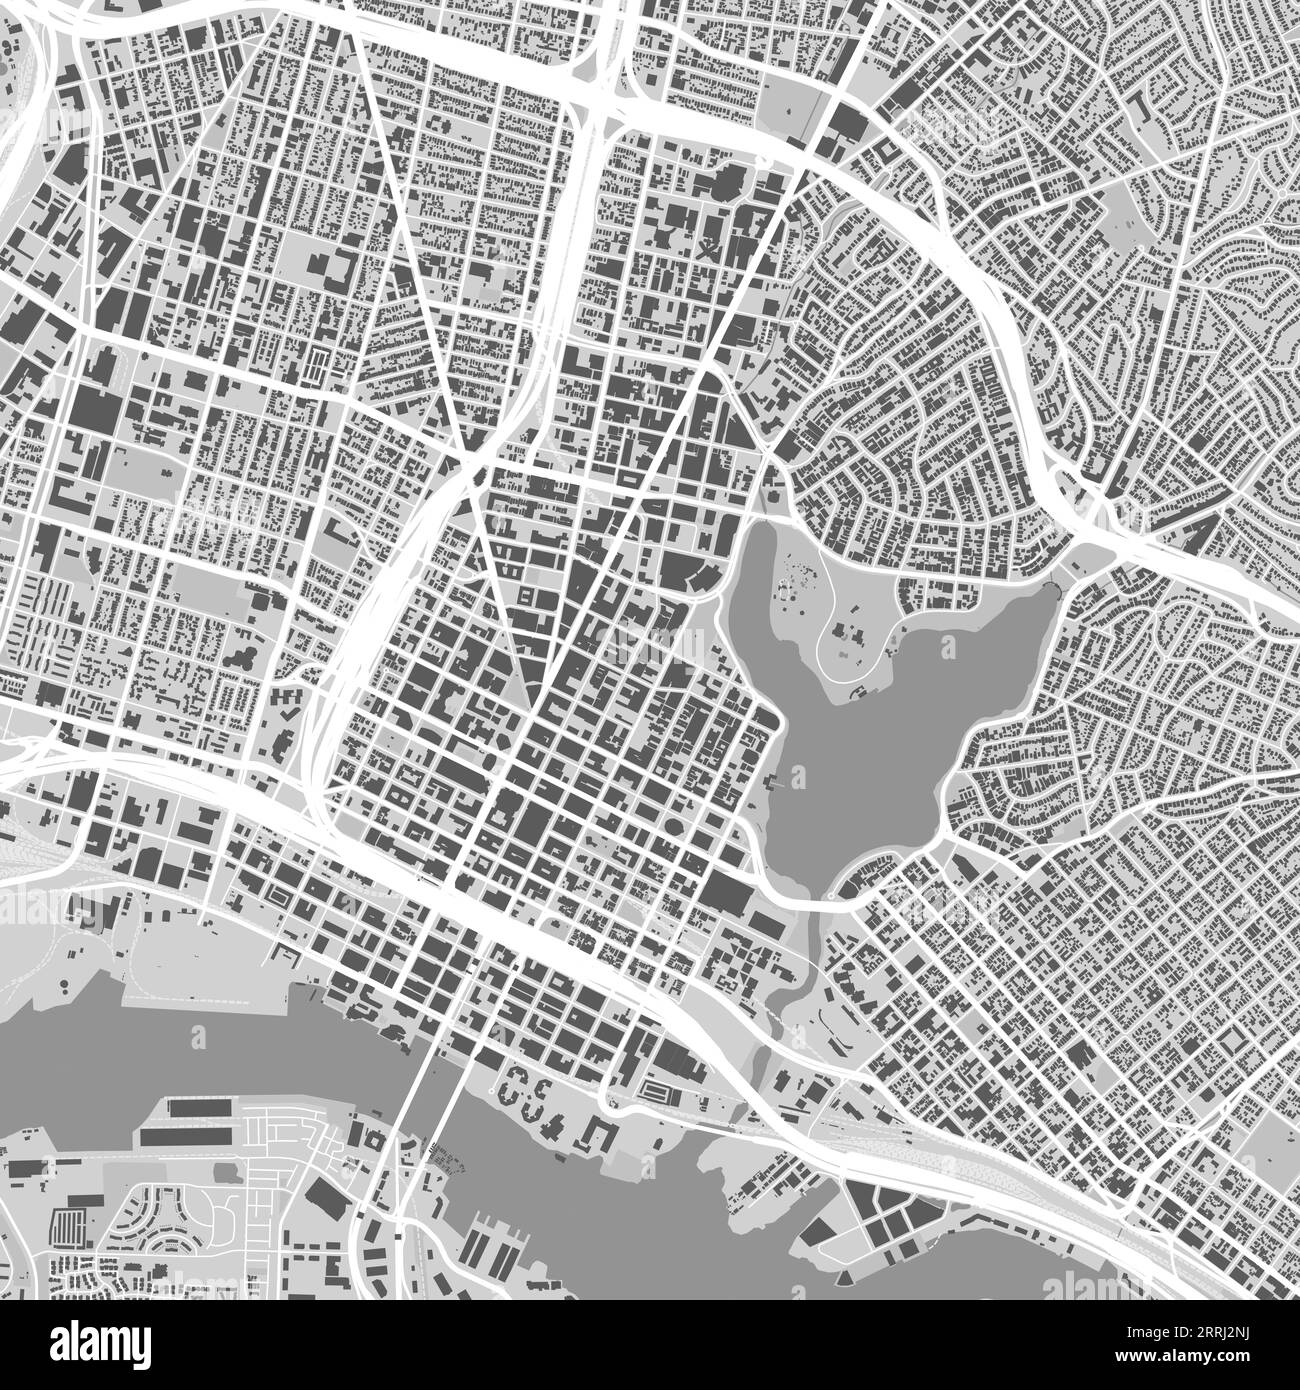 Map of Oakland city, United States. Urban black and white poster. Road map image with metropolitan city area view. Stock Vector